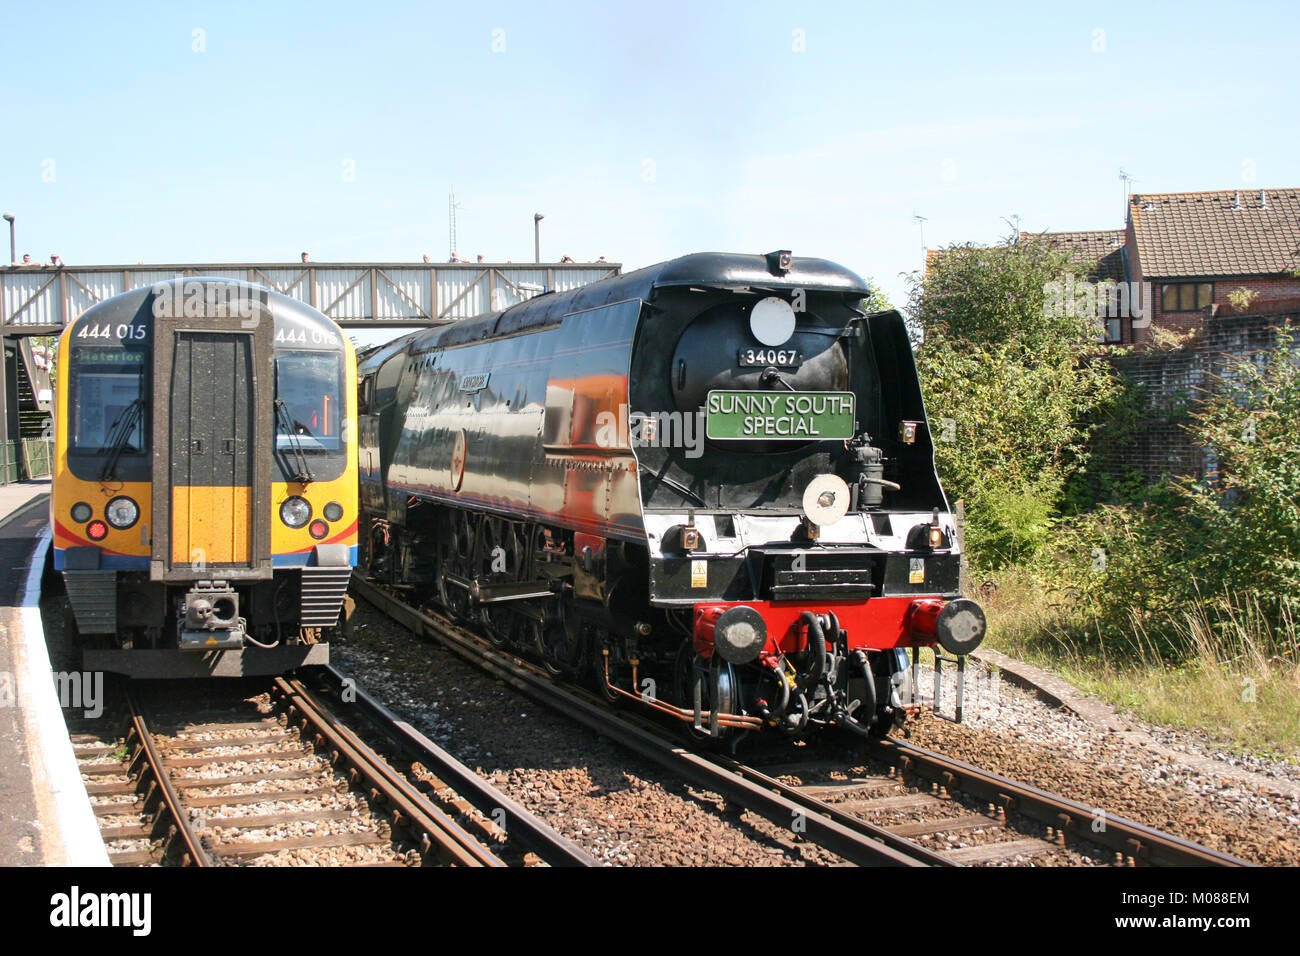 Battle of Britain class steam locomotive No. 34067 Tangmere on the Sunny South Special from Dorchester South to Weymouth 19th August 2009 - Dorchester Stock Photo